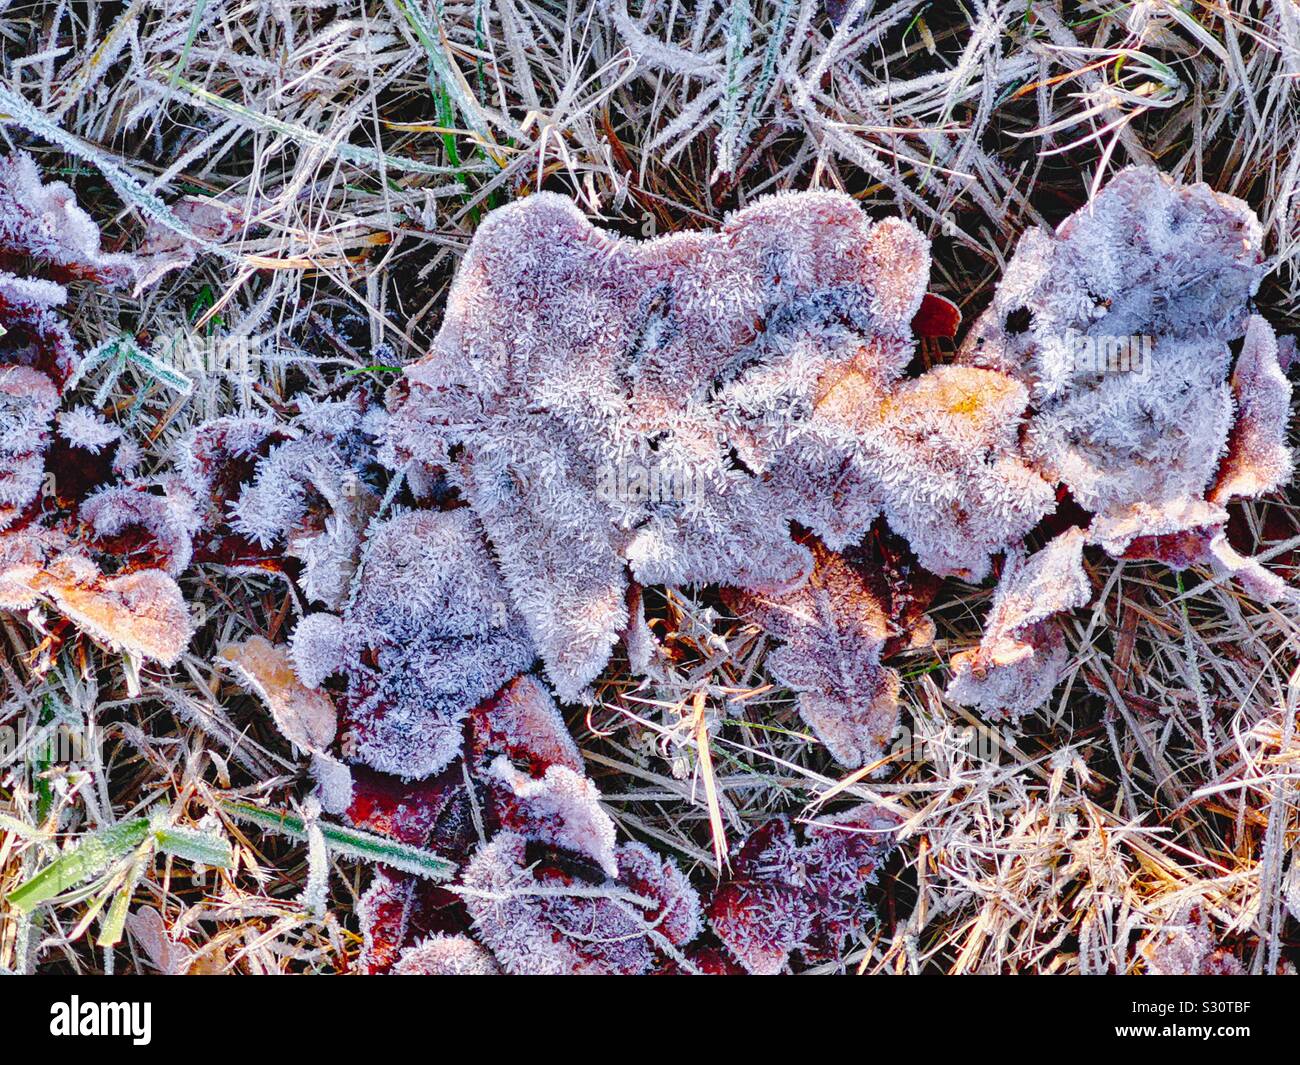 Frozen autumn leaves as seasons change from autumn to winter, Sweden Stock Photo